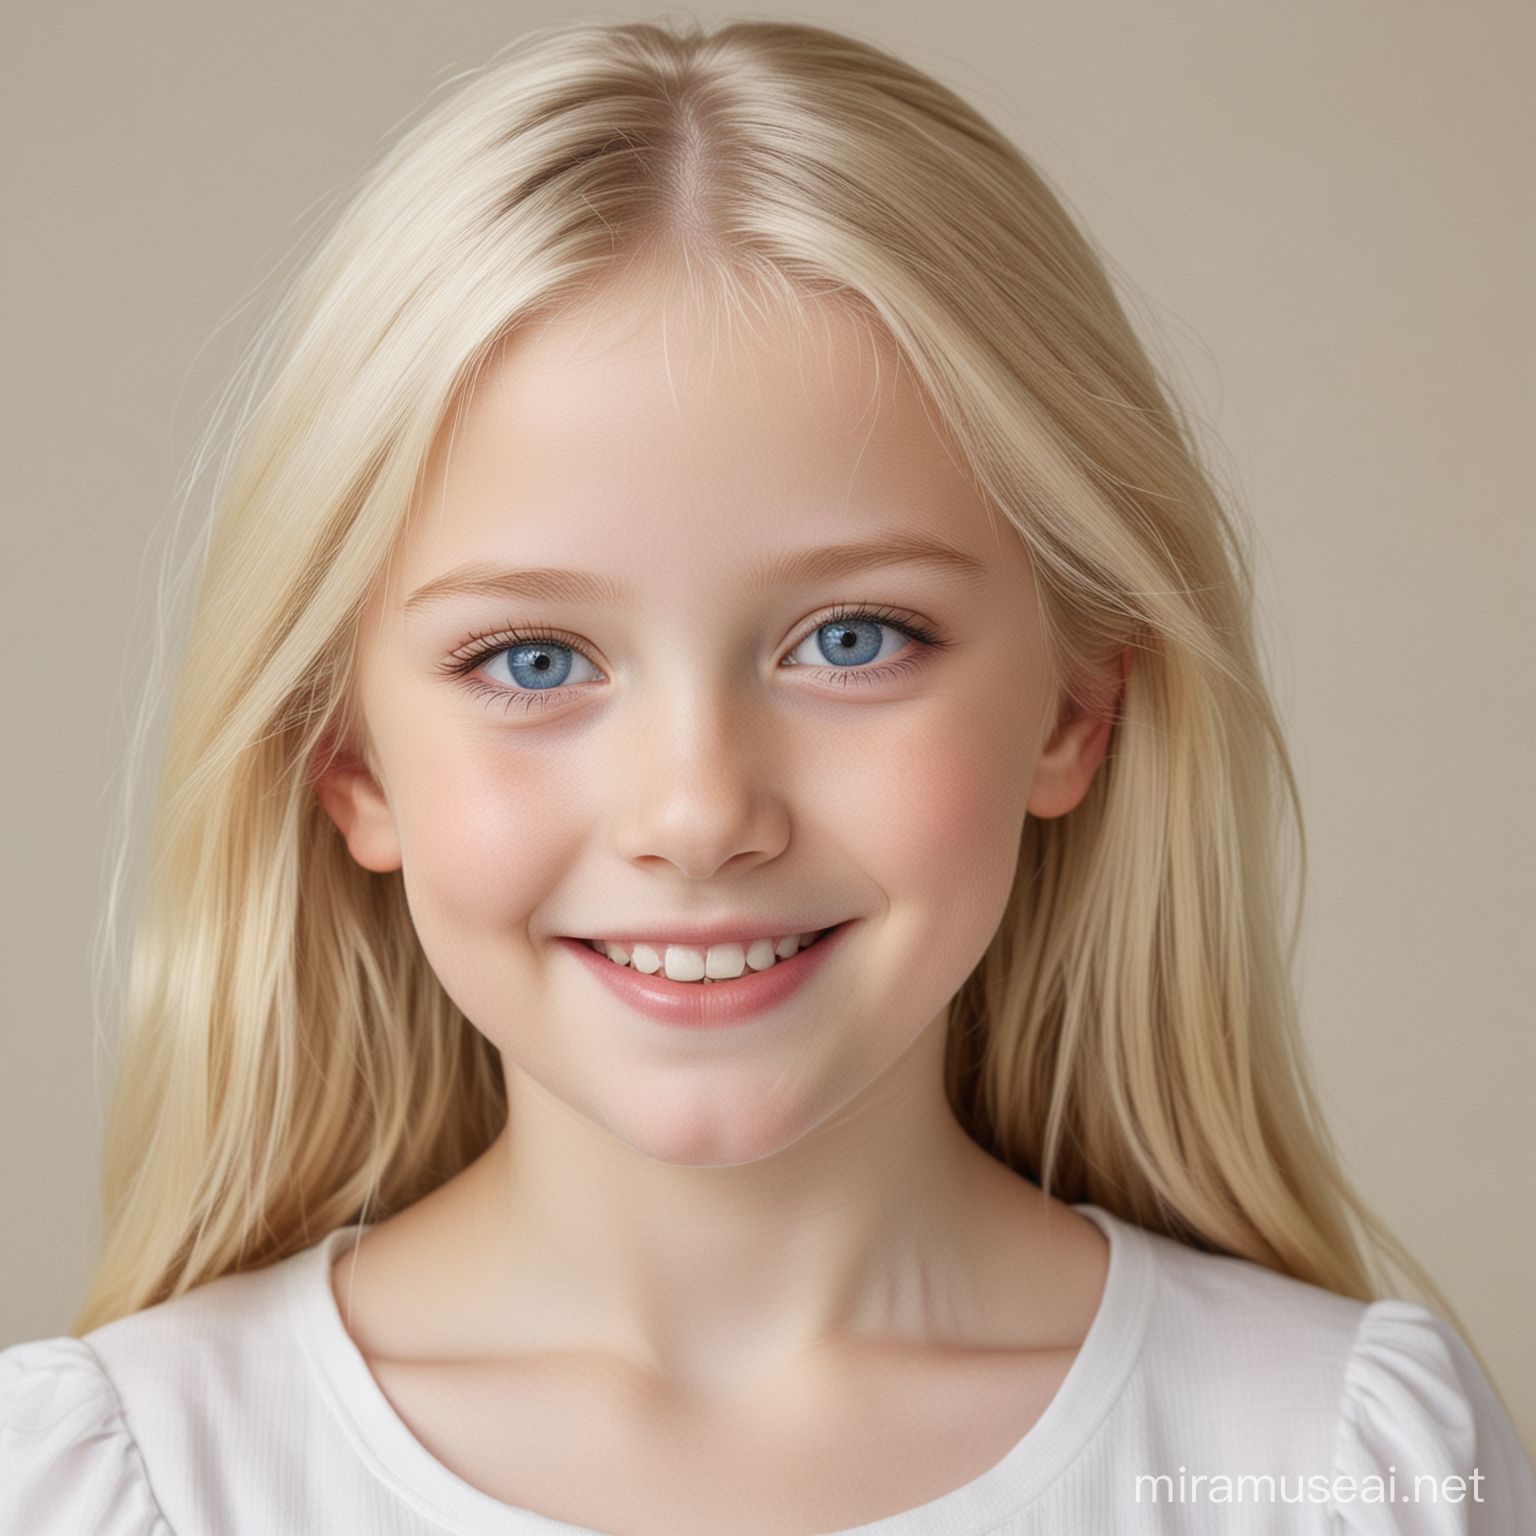 Cheerful Blonde Girl 8 Years Old Smiling and Standing with Bright Blue Eyes